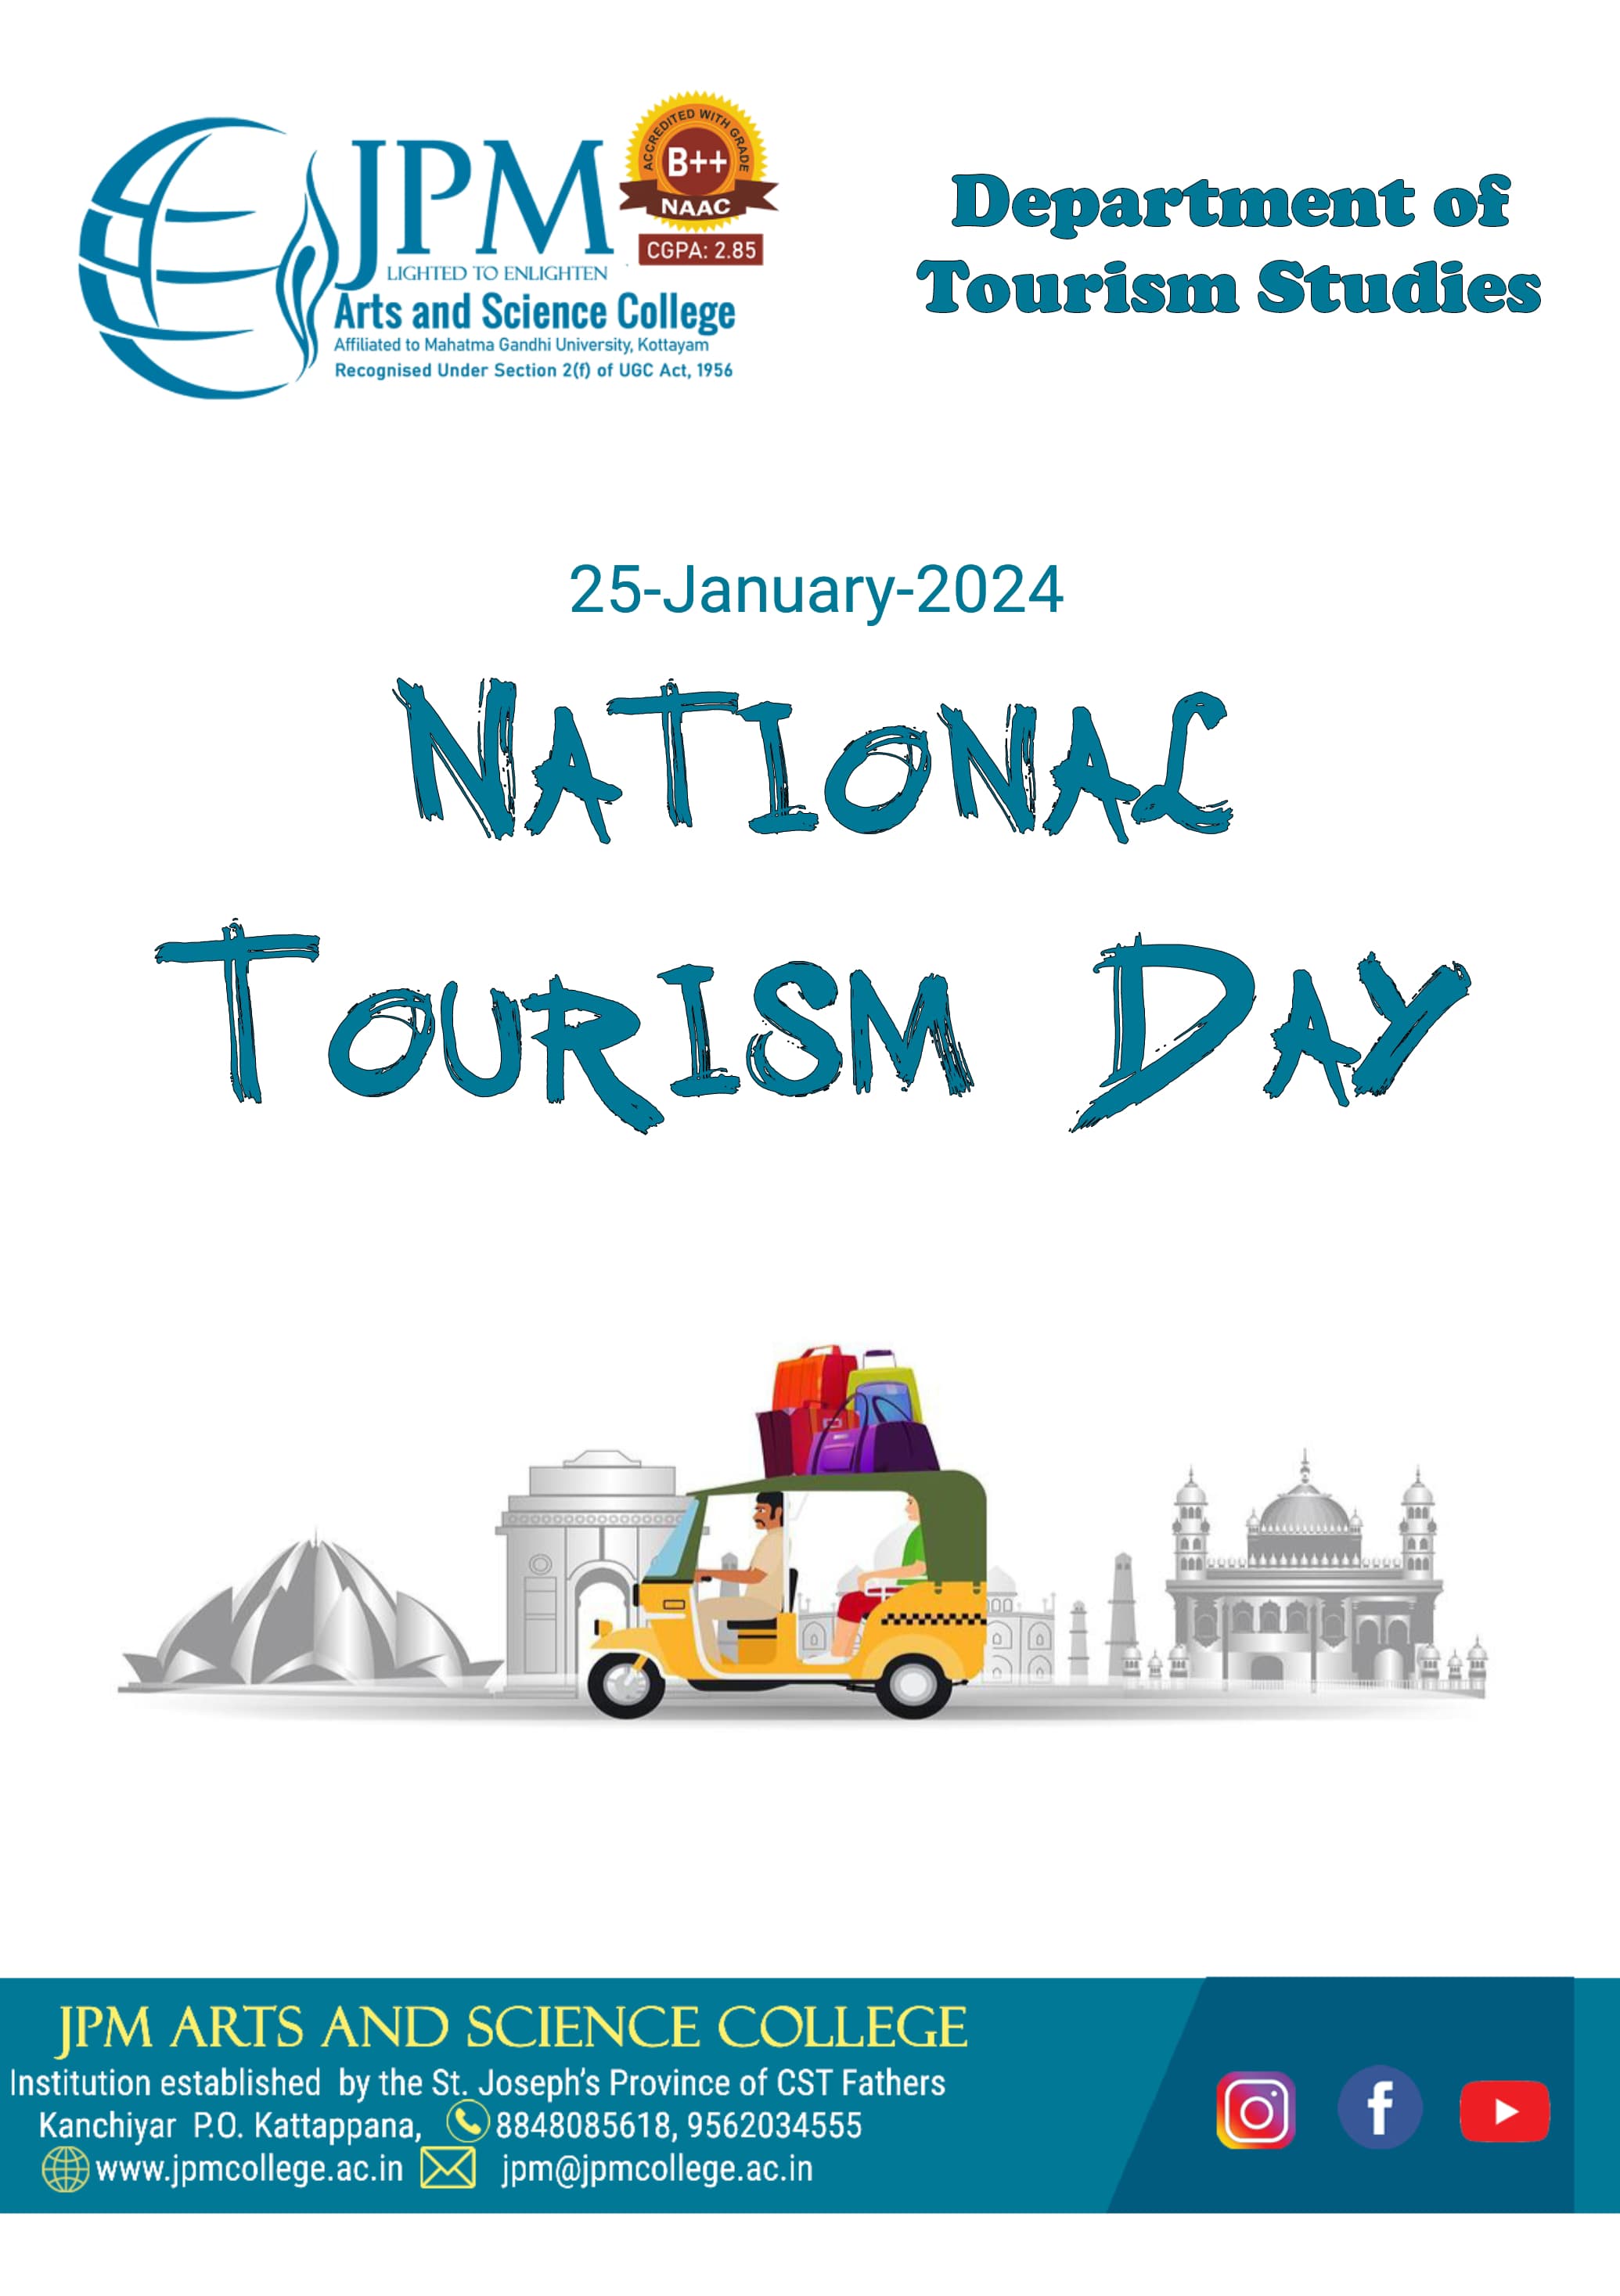 NATIONAL TOURISM DAY